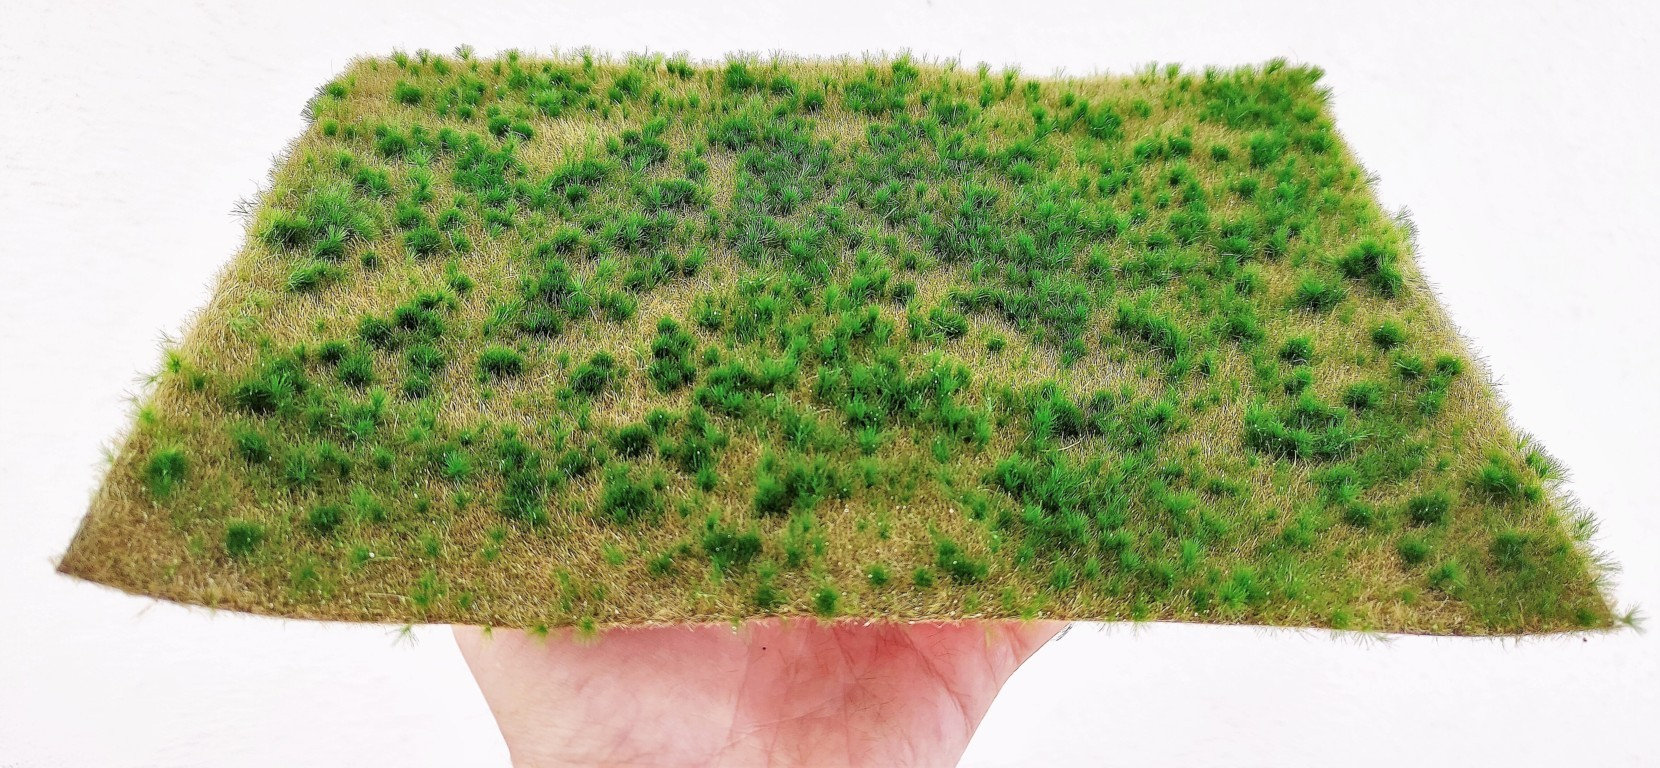 Base A Professional Type 3 A4 Size Wild Grass Soil Wg102 Approximately 21  Cm X 30 Cm Surface 